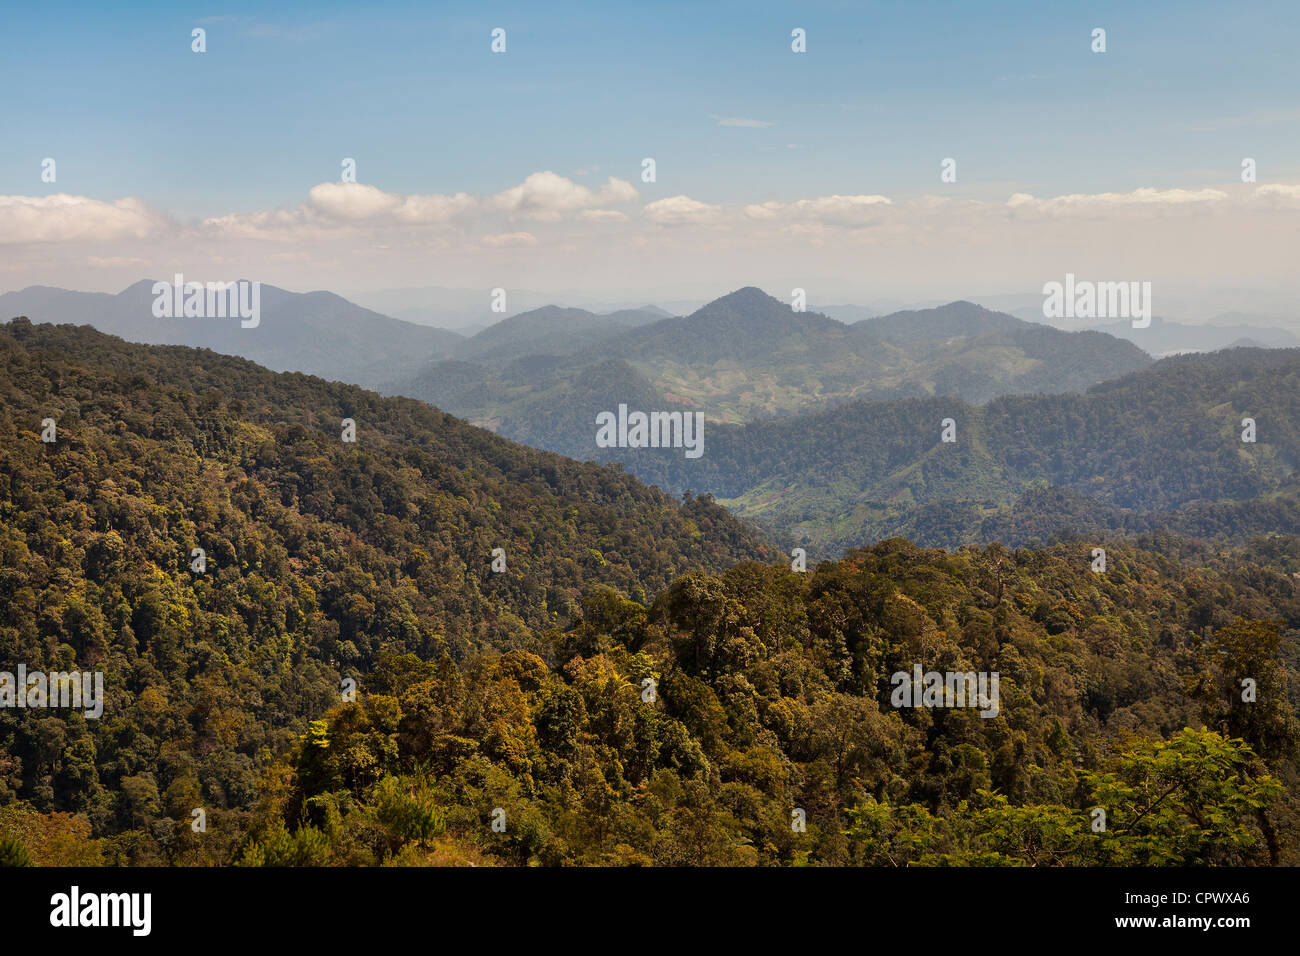 Tropical rainforest highland view looking South, forested hills, warm evening sunlight, Genting Highlands, Malaysia. Stock Photo